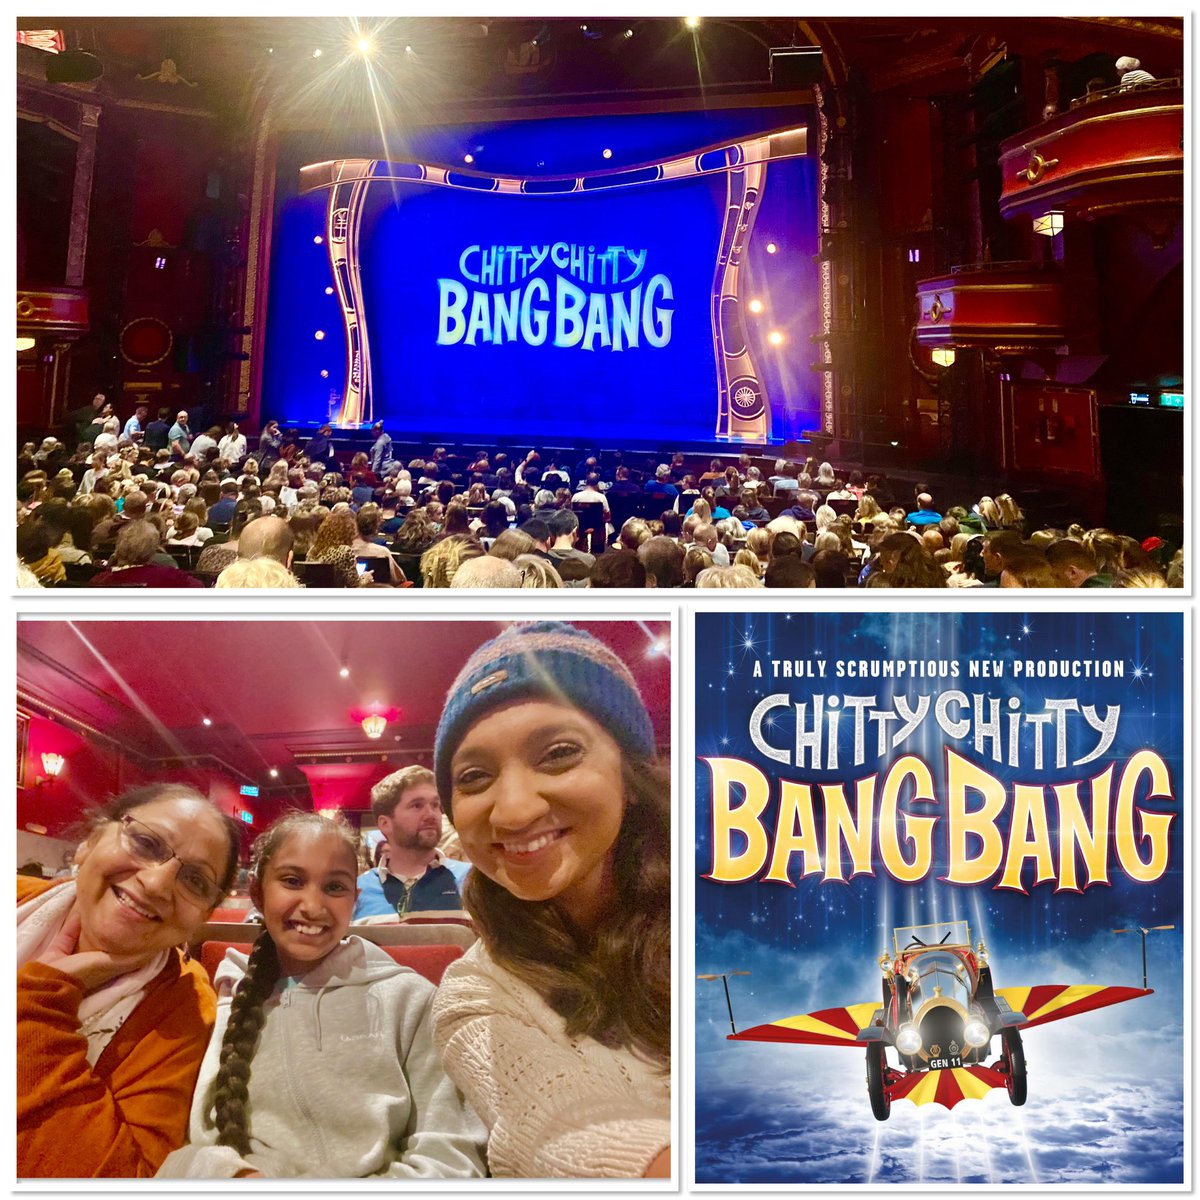 As someone that grew up on classic musicals (still watch them every Christmas) - watching Chitty Chitty Bang Bang was magical. @mayflower have done the most incredible job, so if you get a chance to go see it, please do! We took three generations - and we all loved every minute